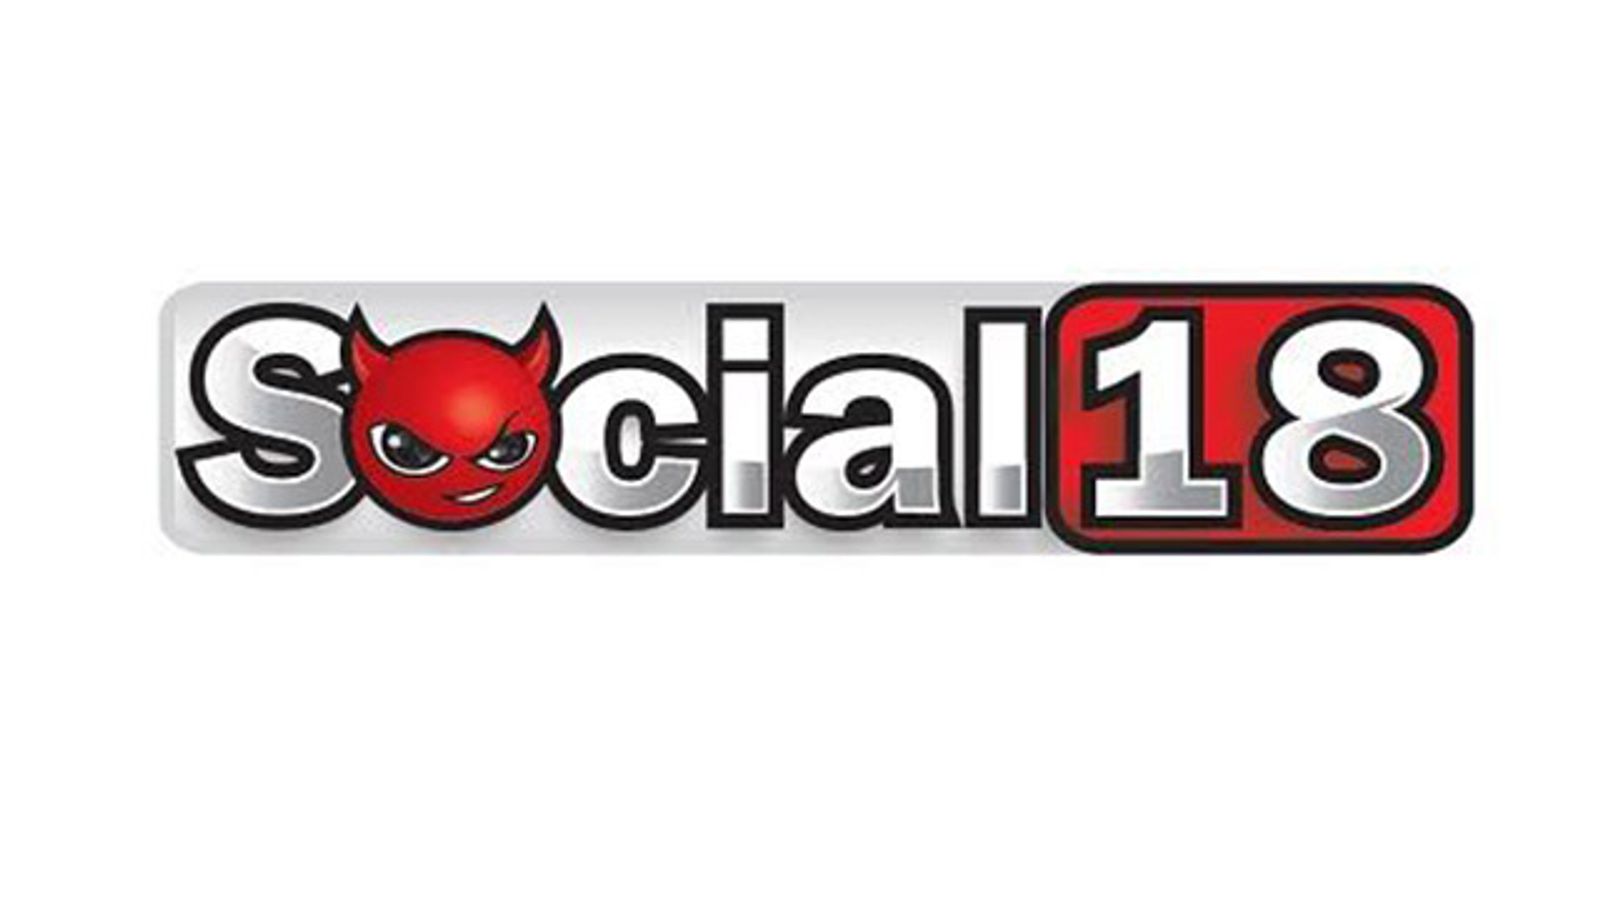 Social18 Adds Porn Star Excitement With Series of Contests